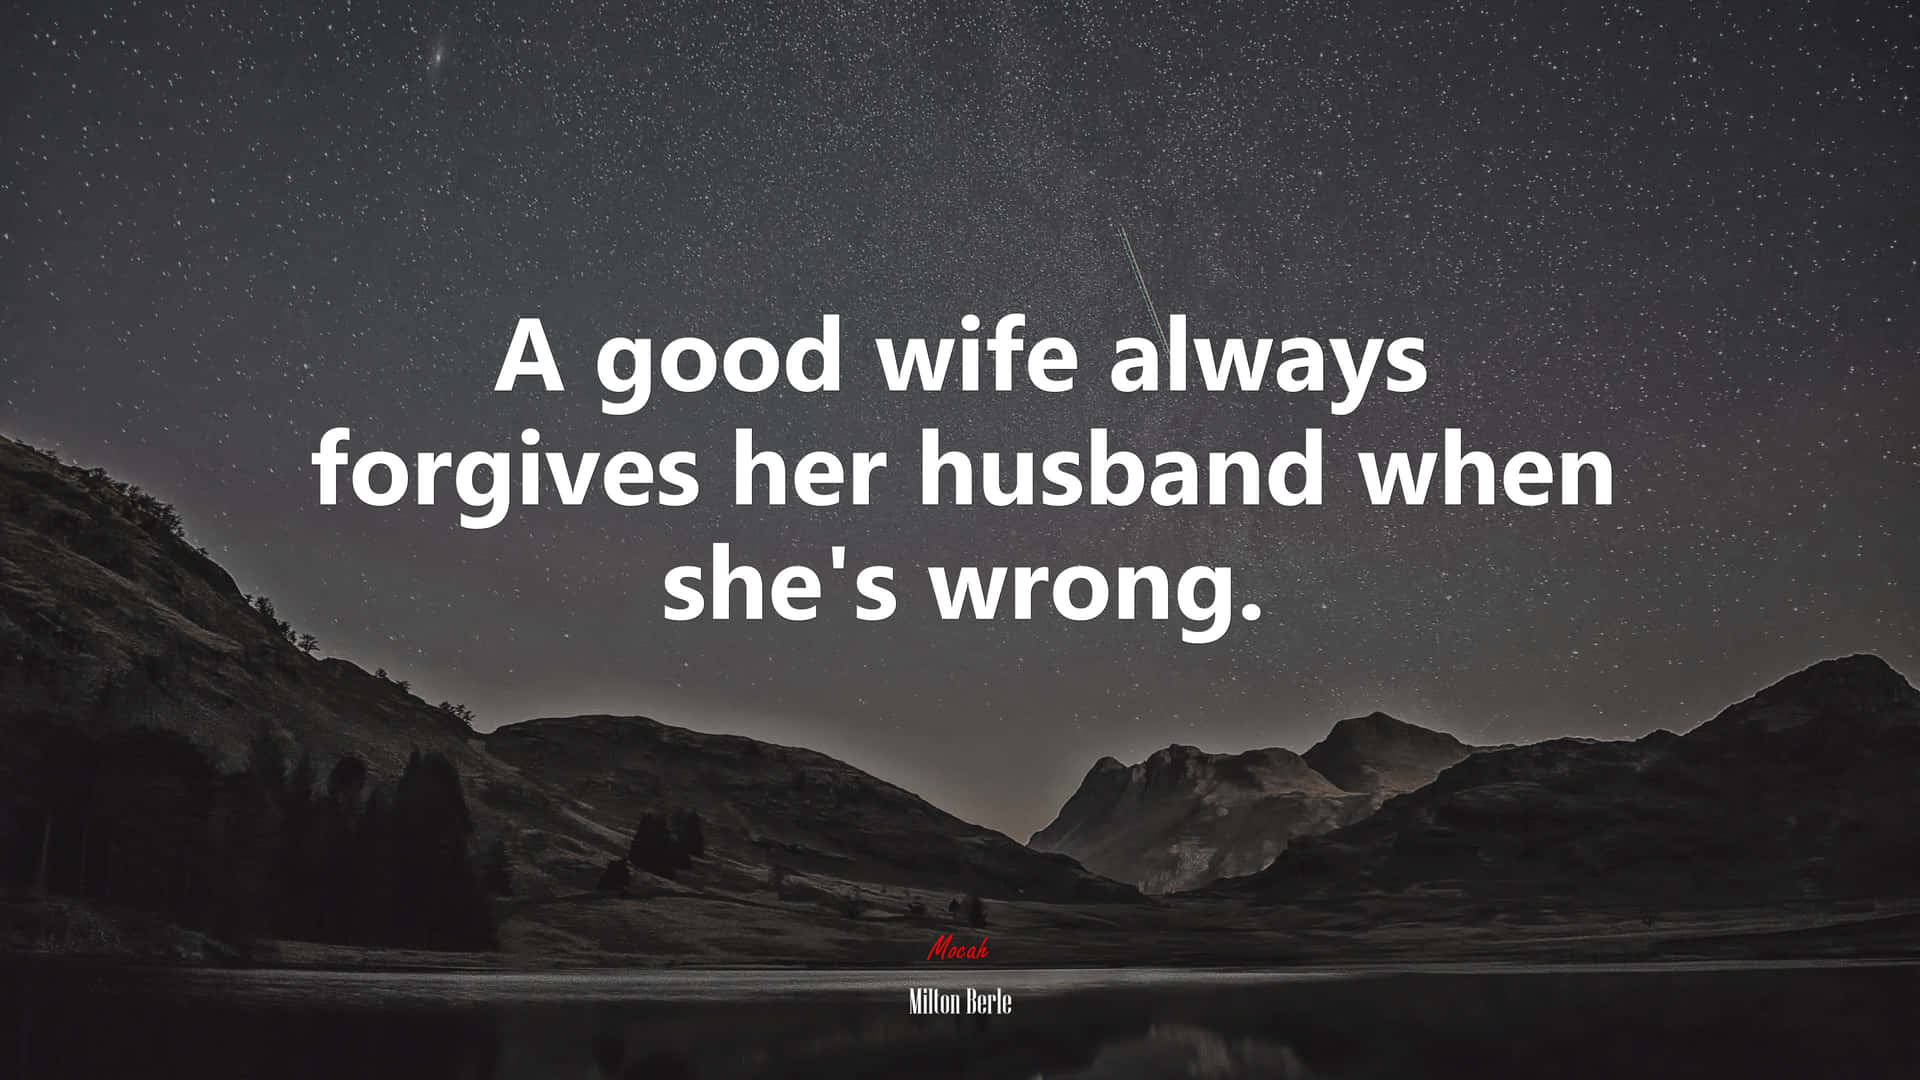 Quotes For Husband And Wife Pictures